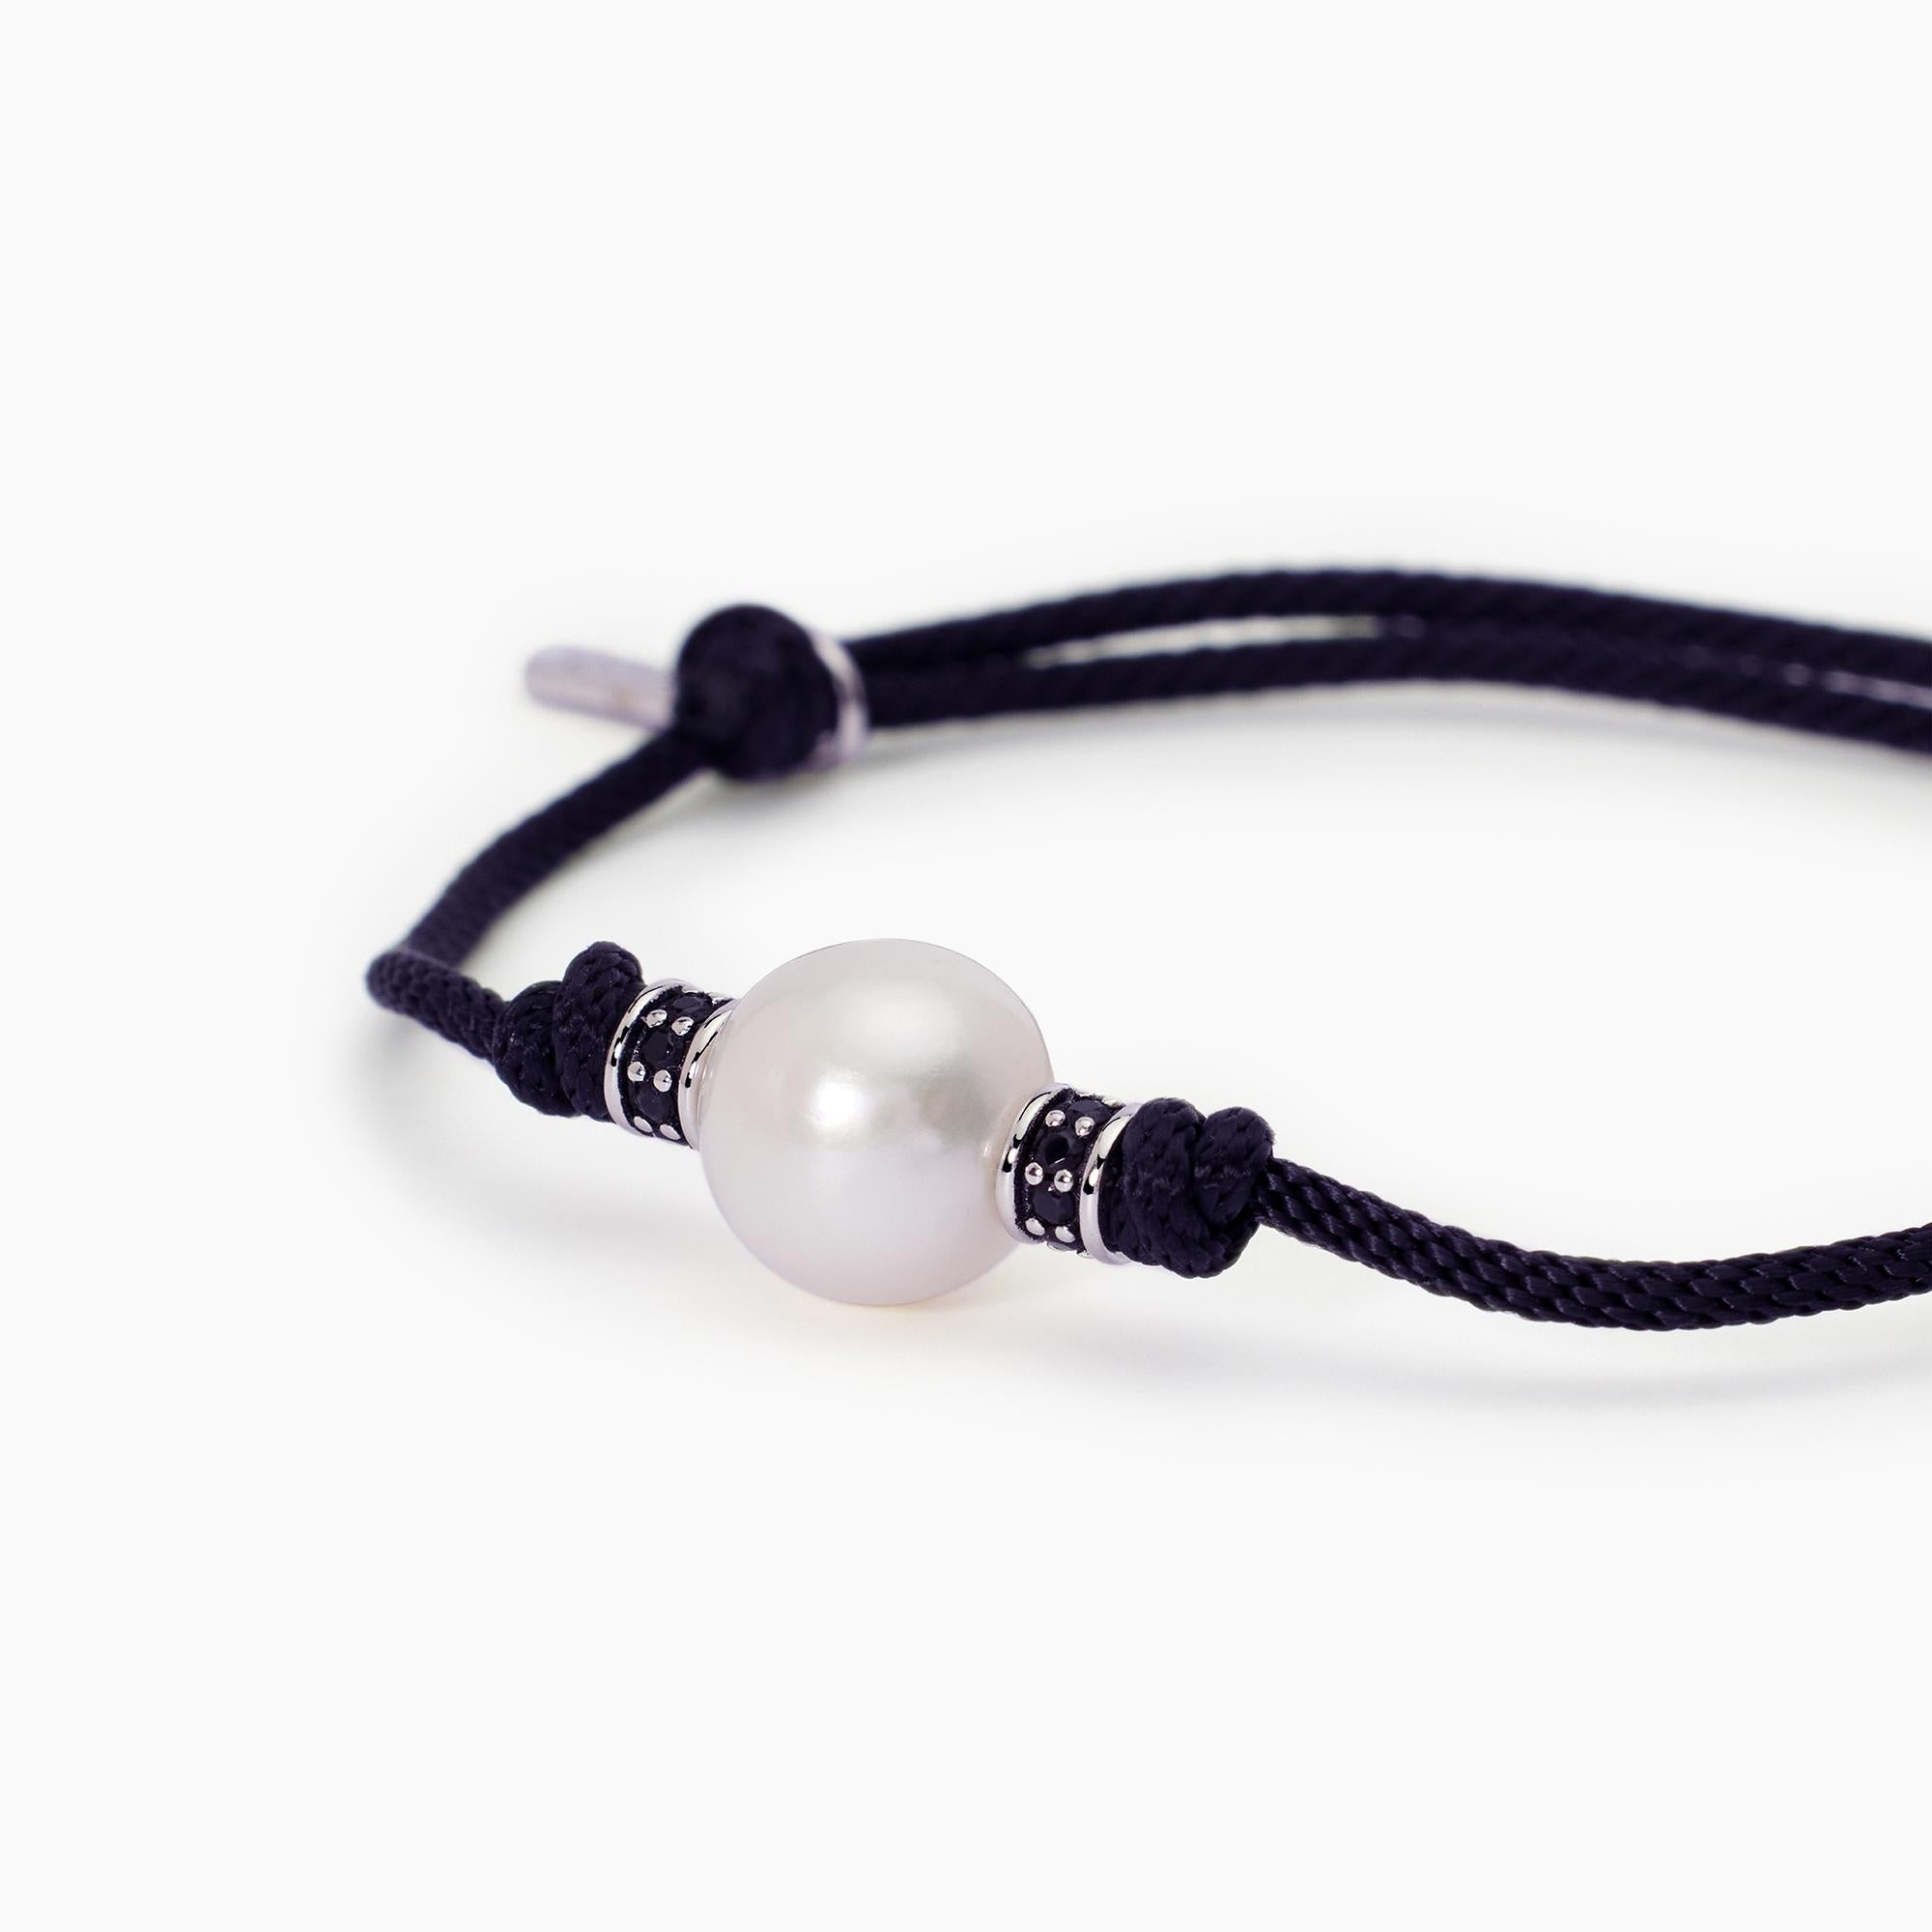 Mabina Man - Bracelet with black cord and white pearl TROPICAL - 533720